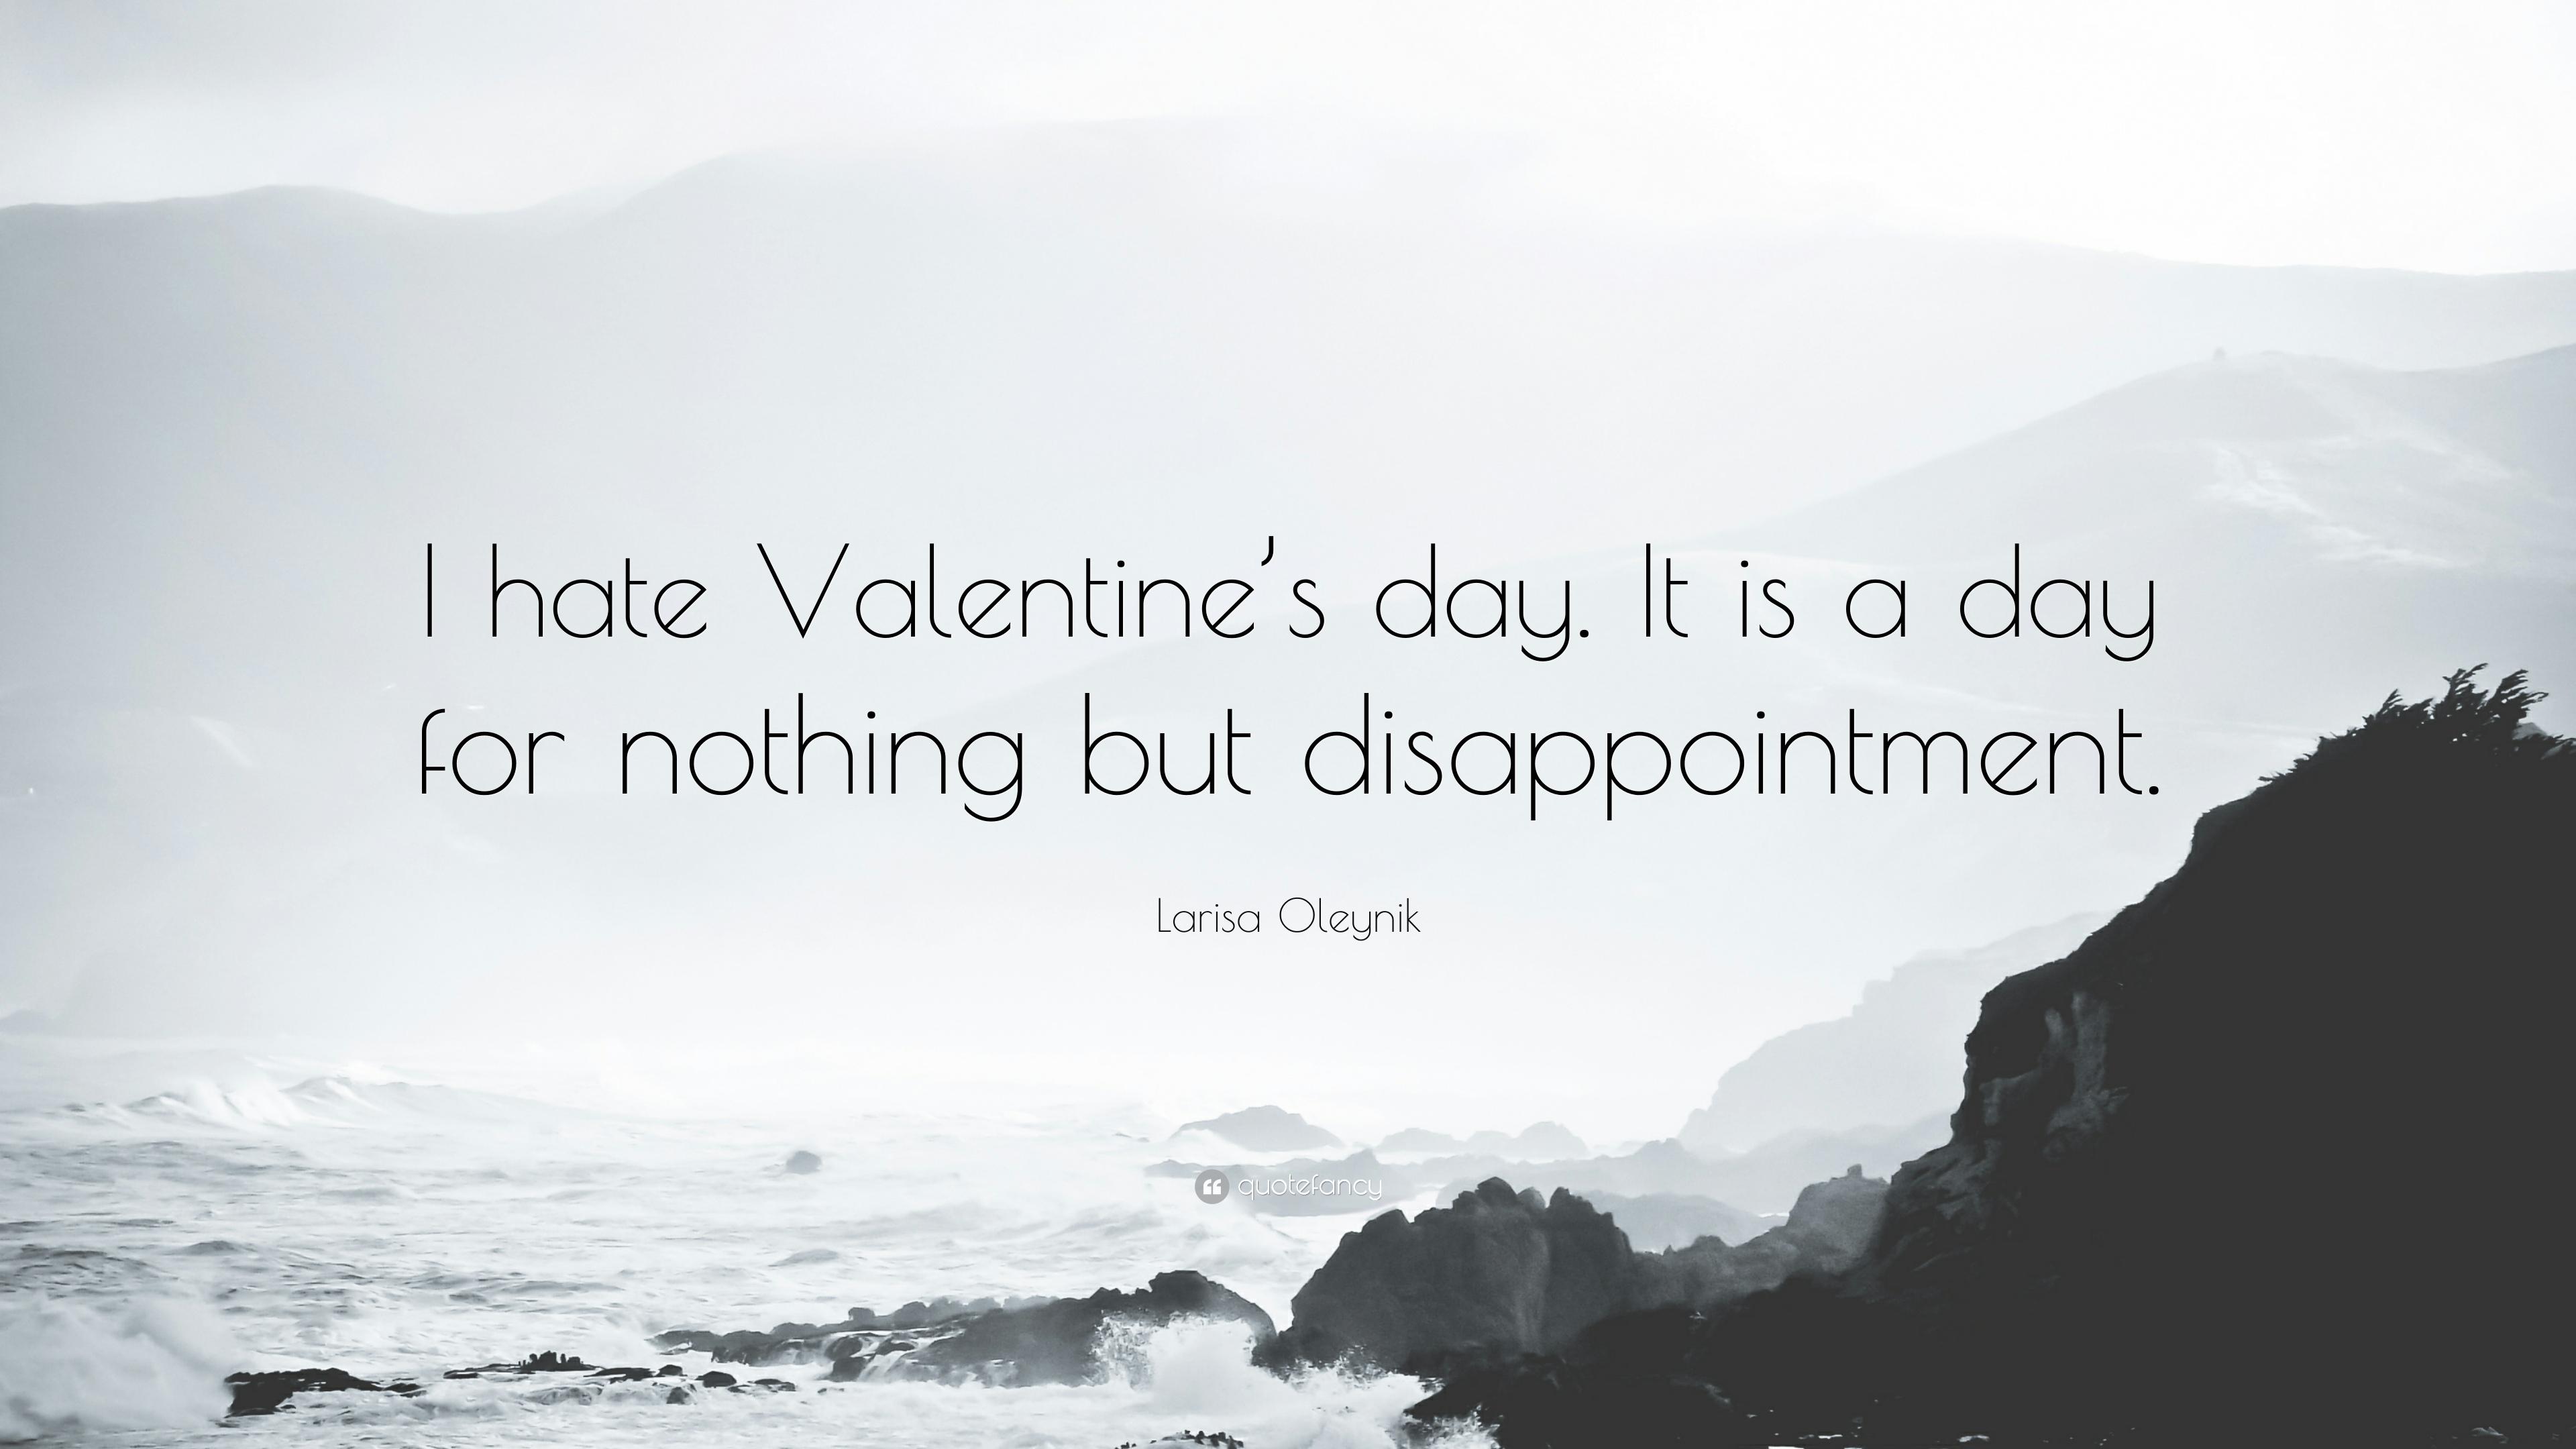 Larisa Oleynik Quote: “I hate Valentine's day. It is a day